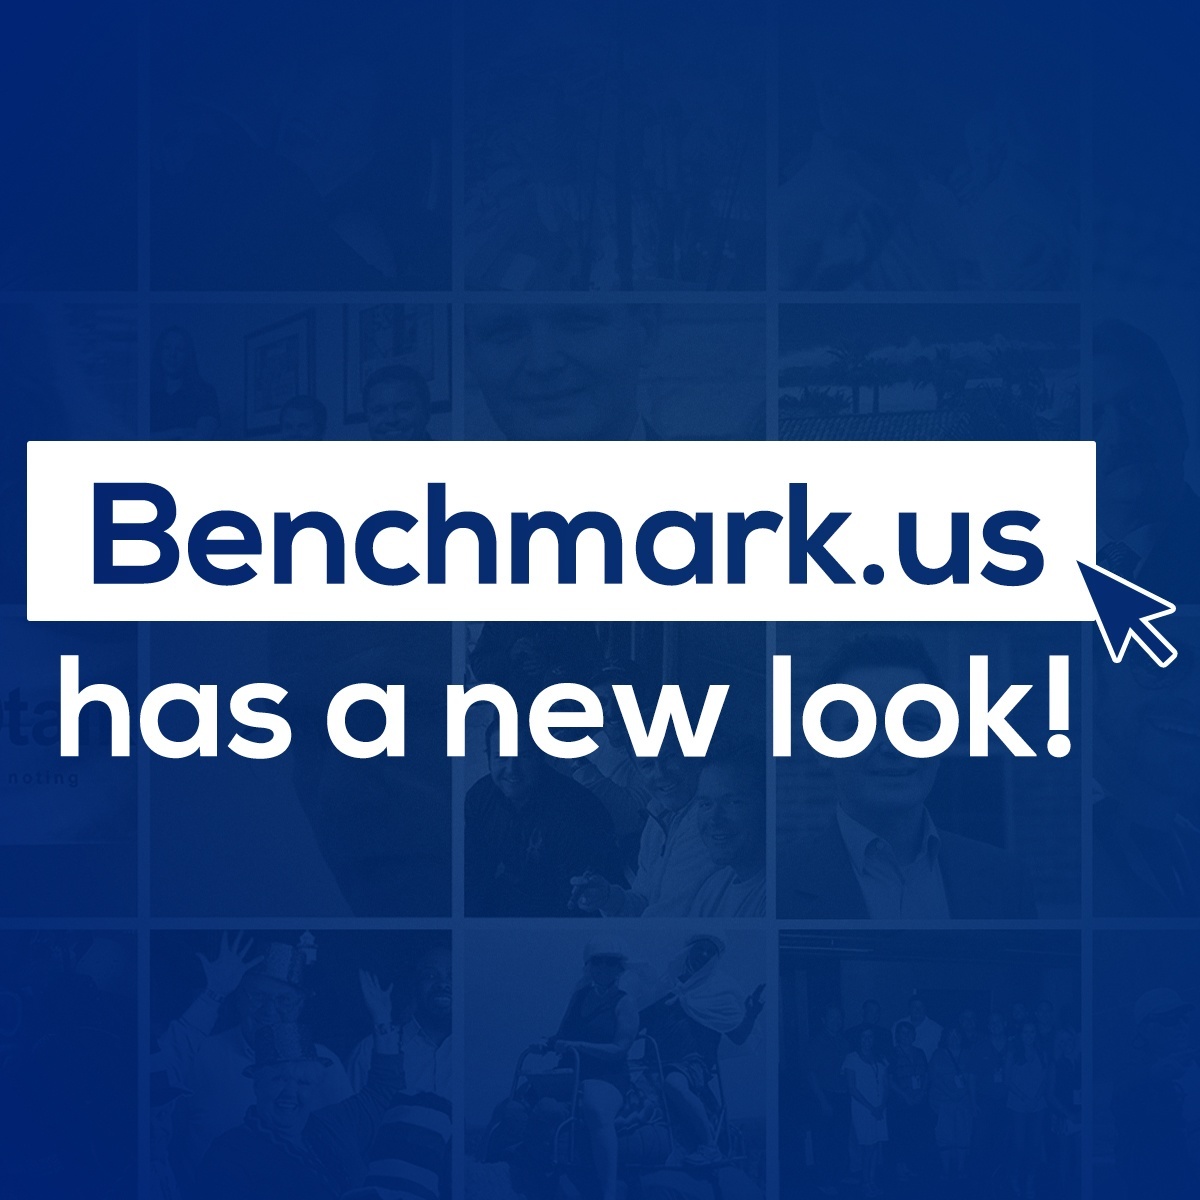 We are proud to present our all new website here at Benchmark.us